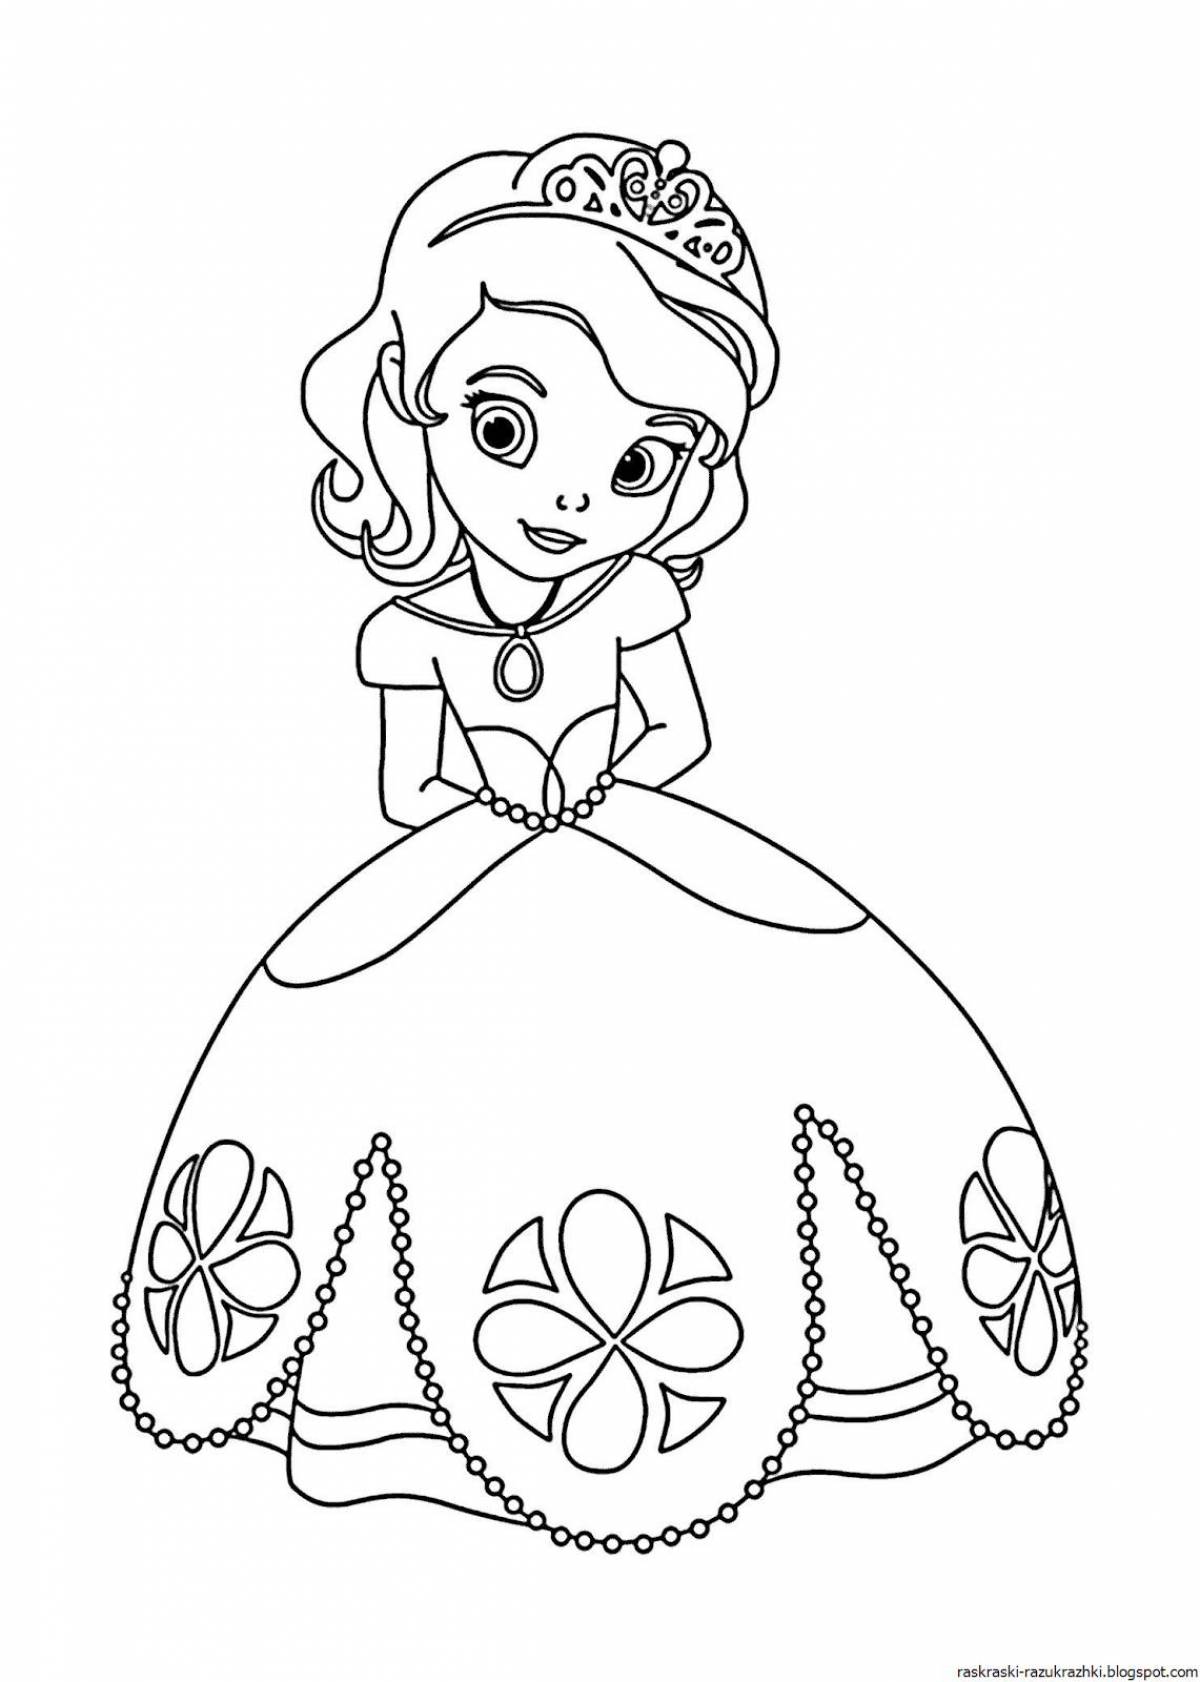 Gorgeous princess coloring book for girls